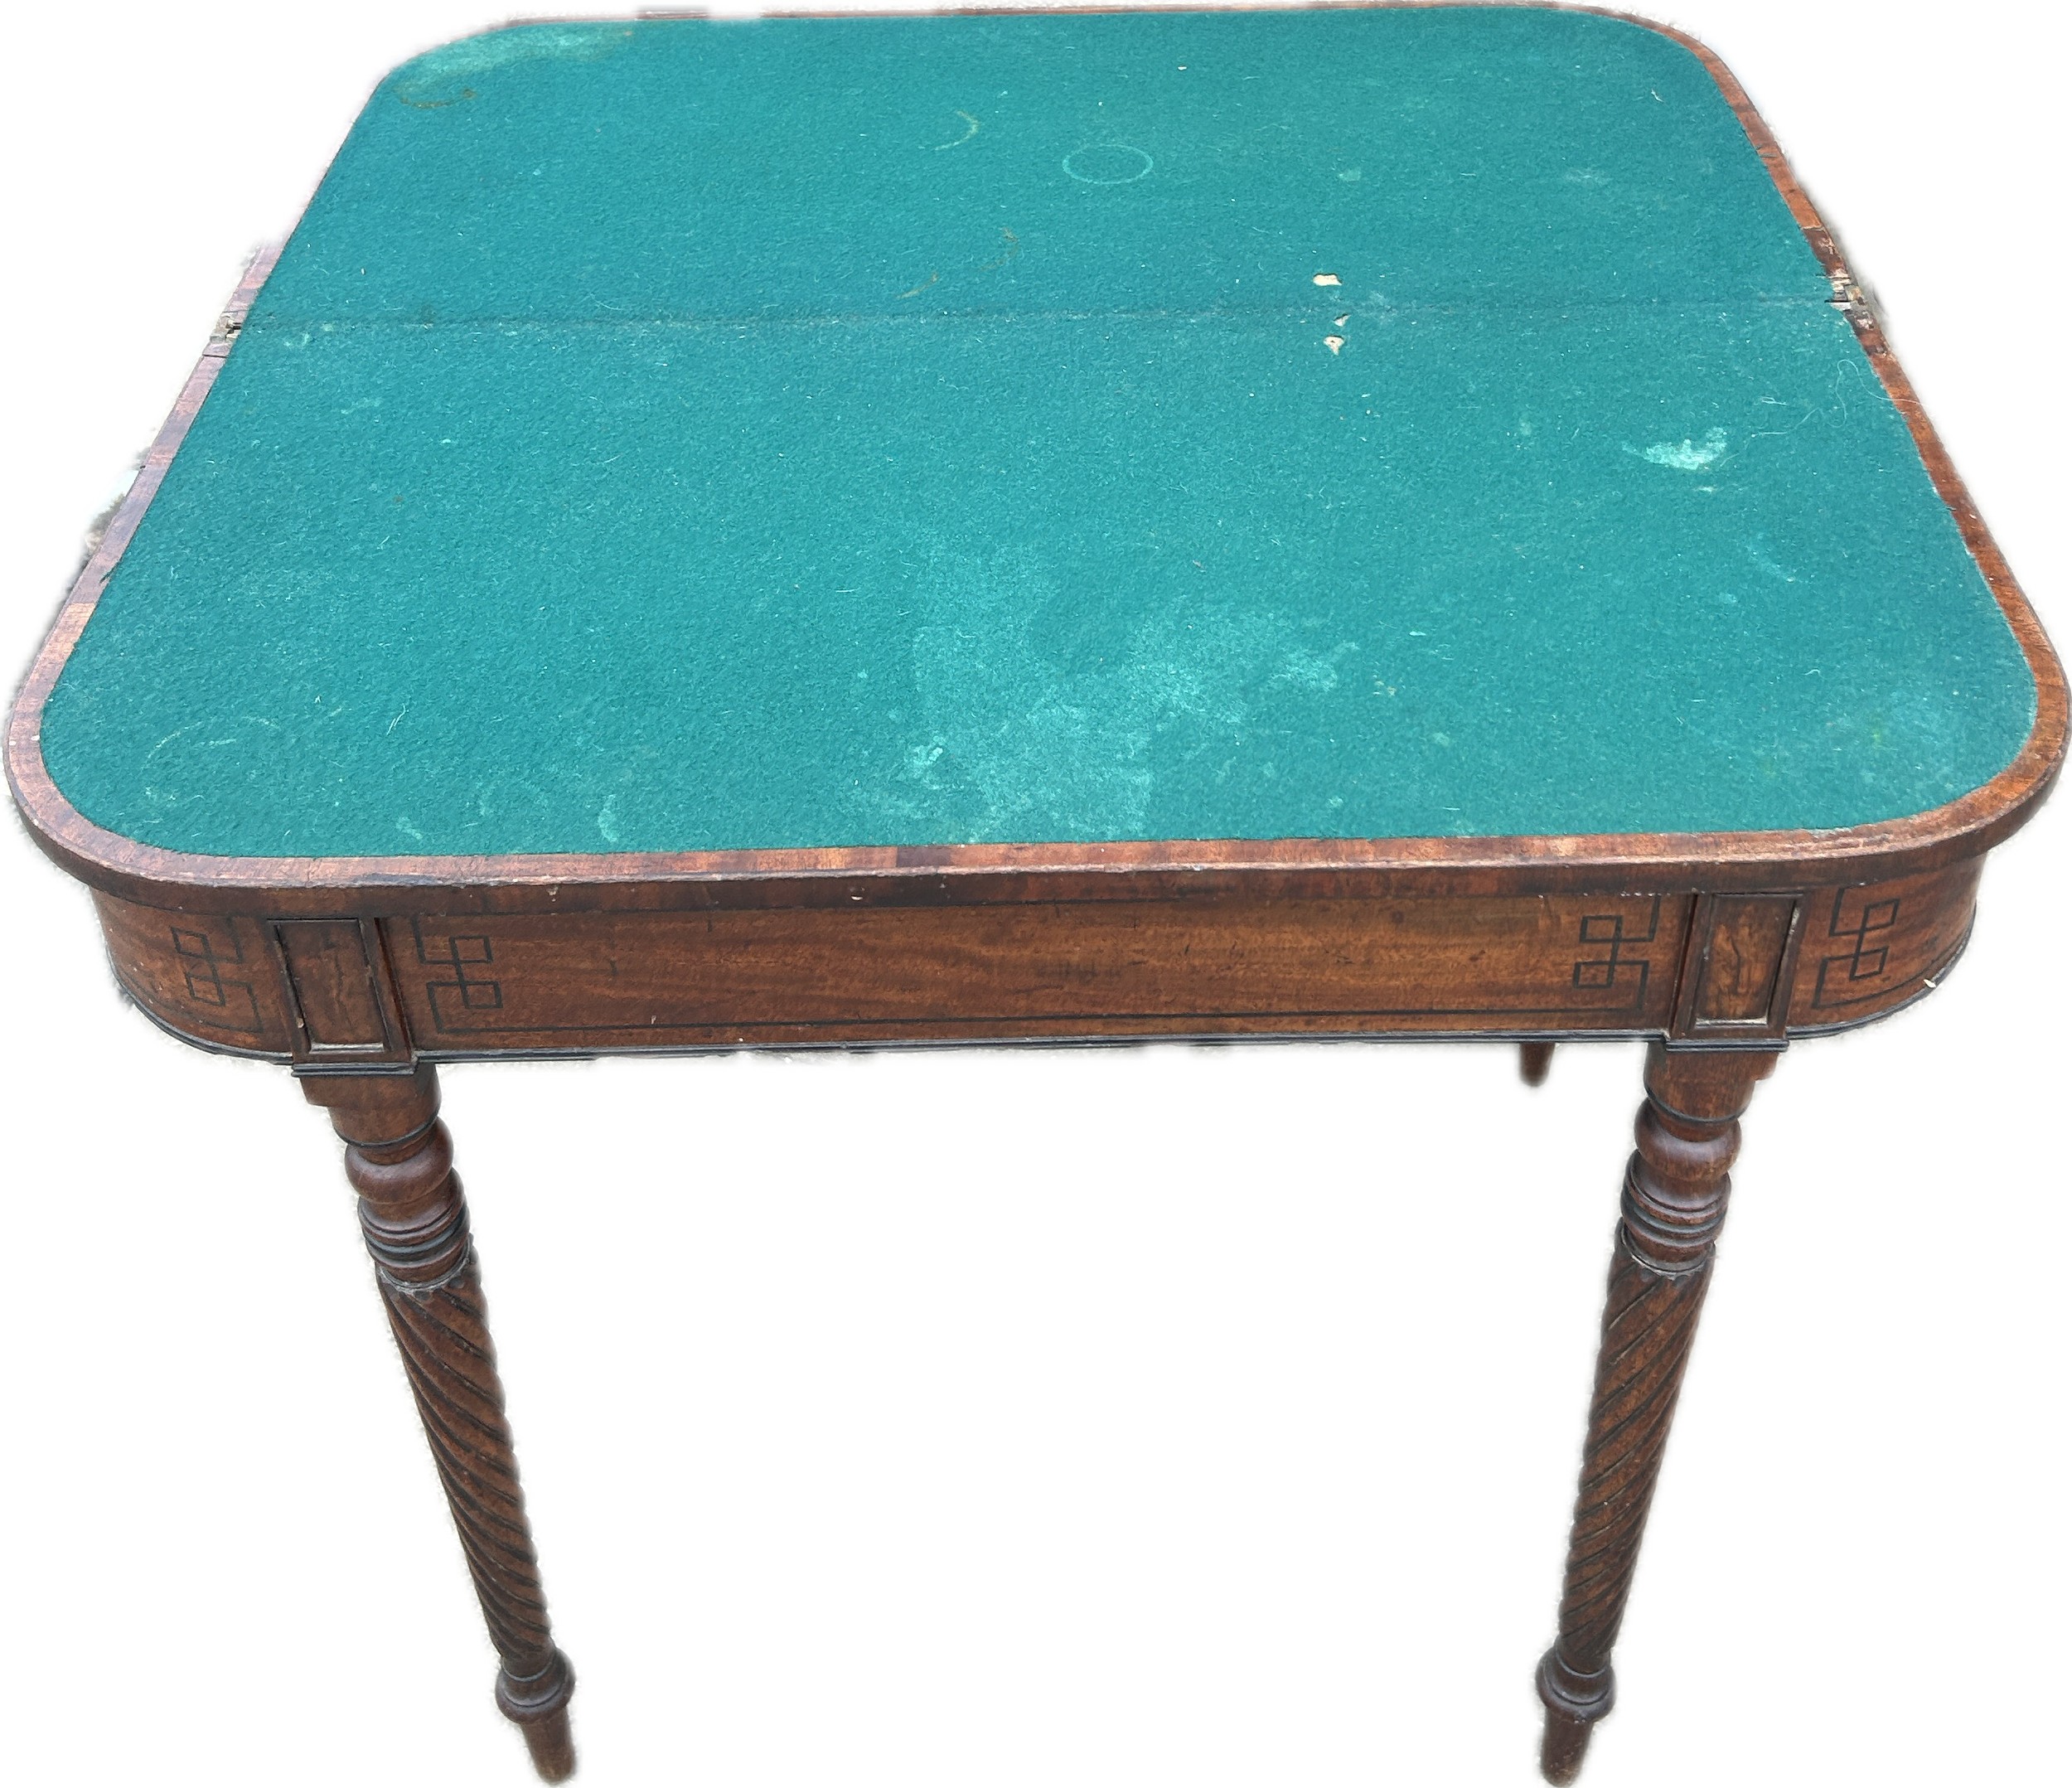 Antique hall/games table measures approx 30 inches tall, 34 wide when open - Image 2 of 2